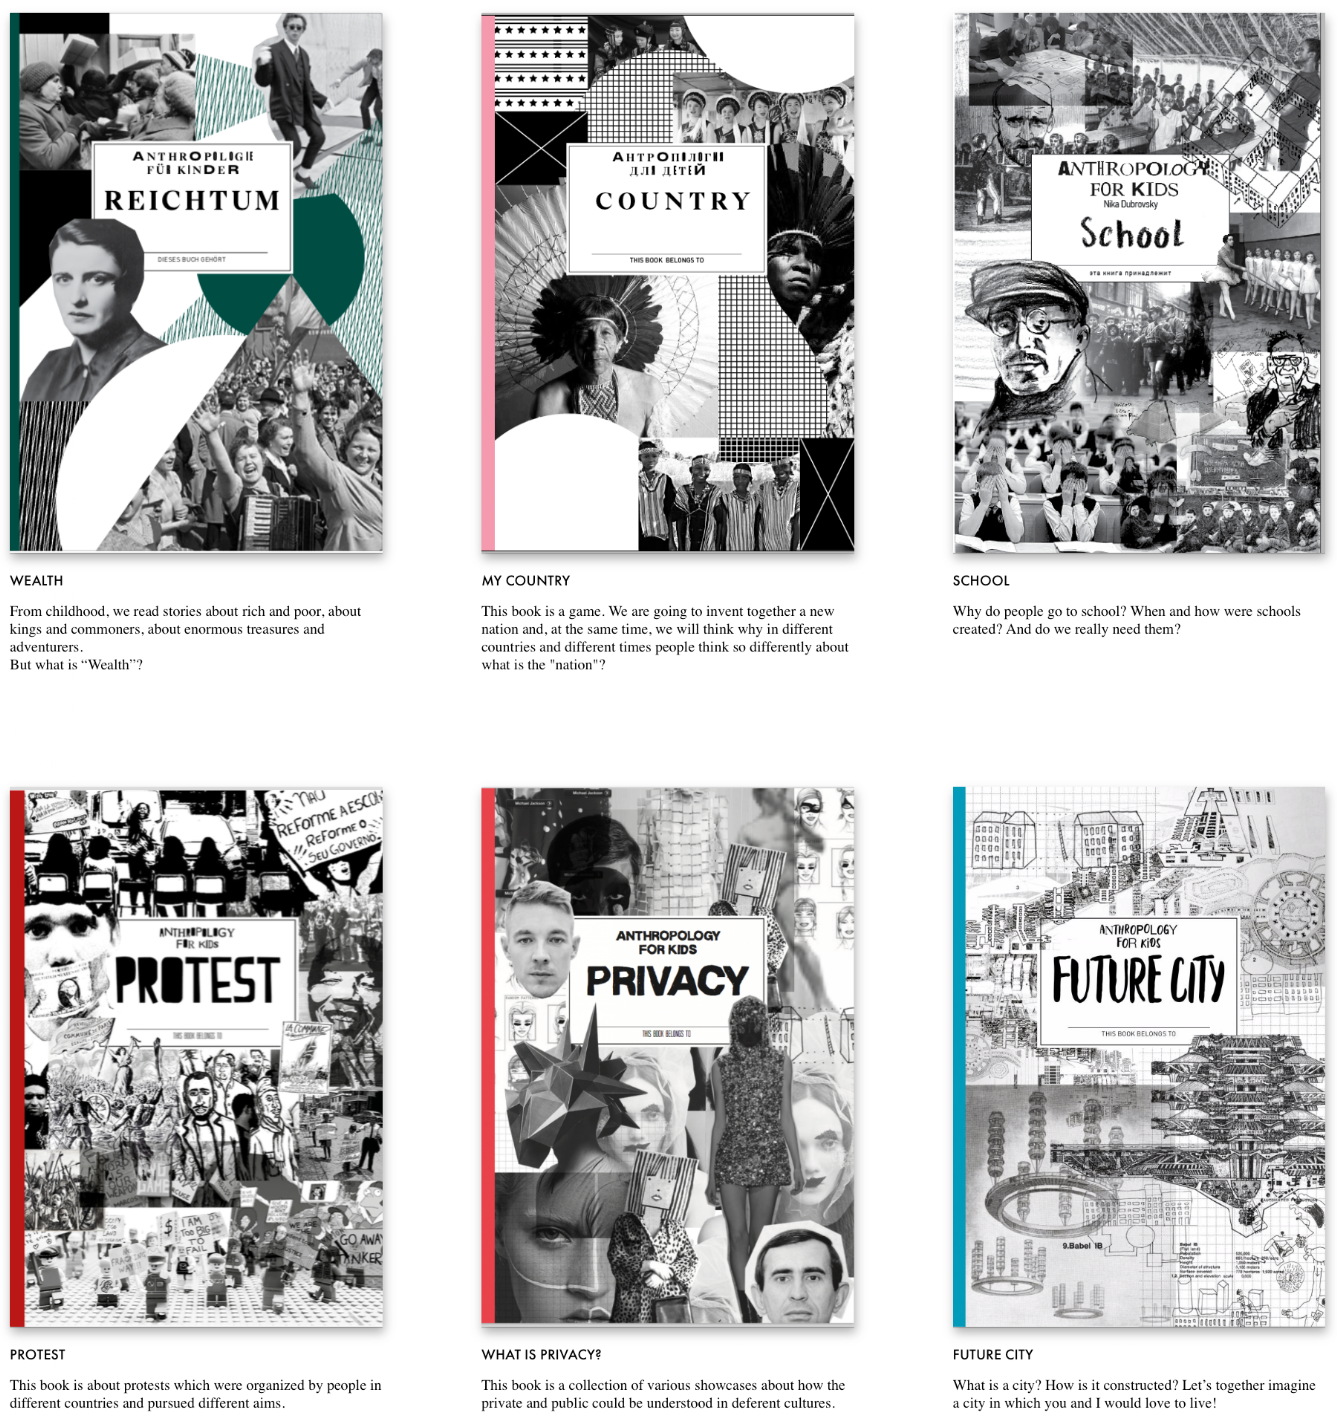 Six different covers with different themes of the publications that were created within the framework of "Anthropology for Kids"